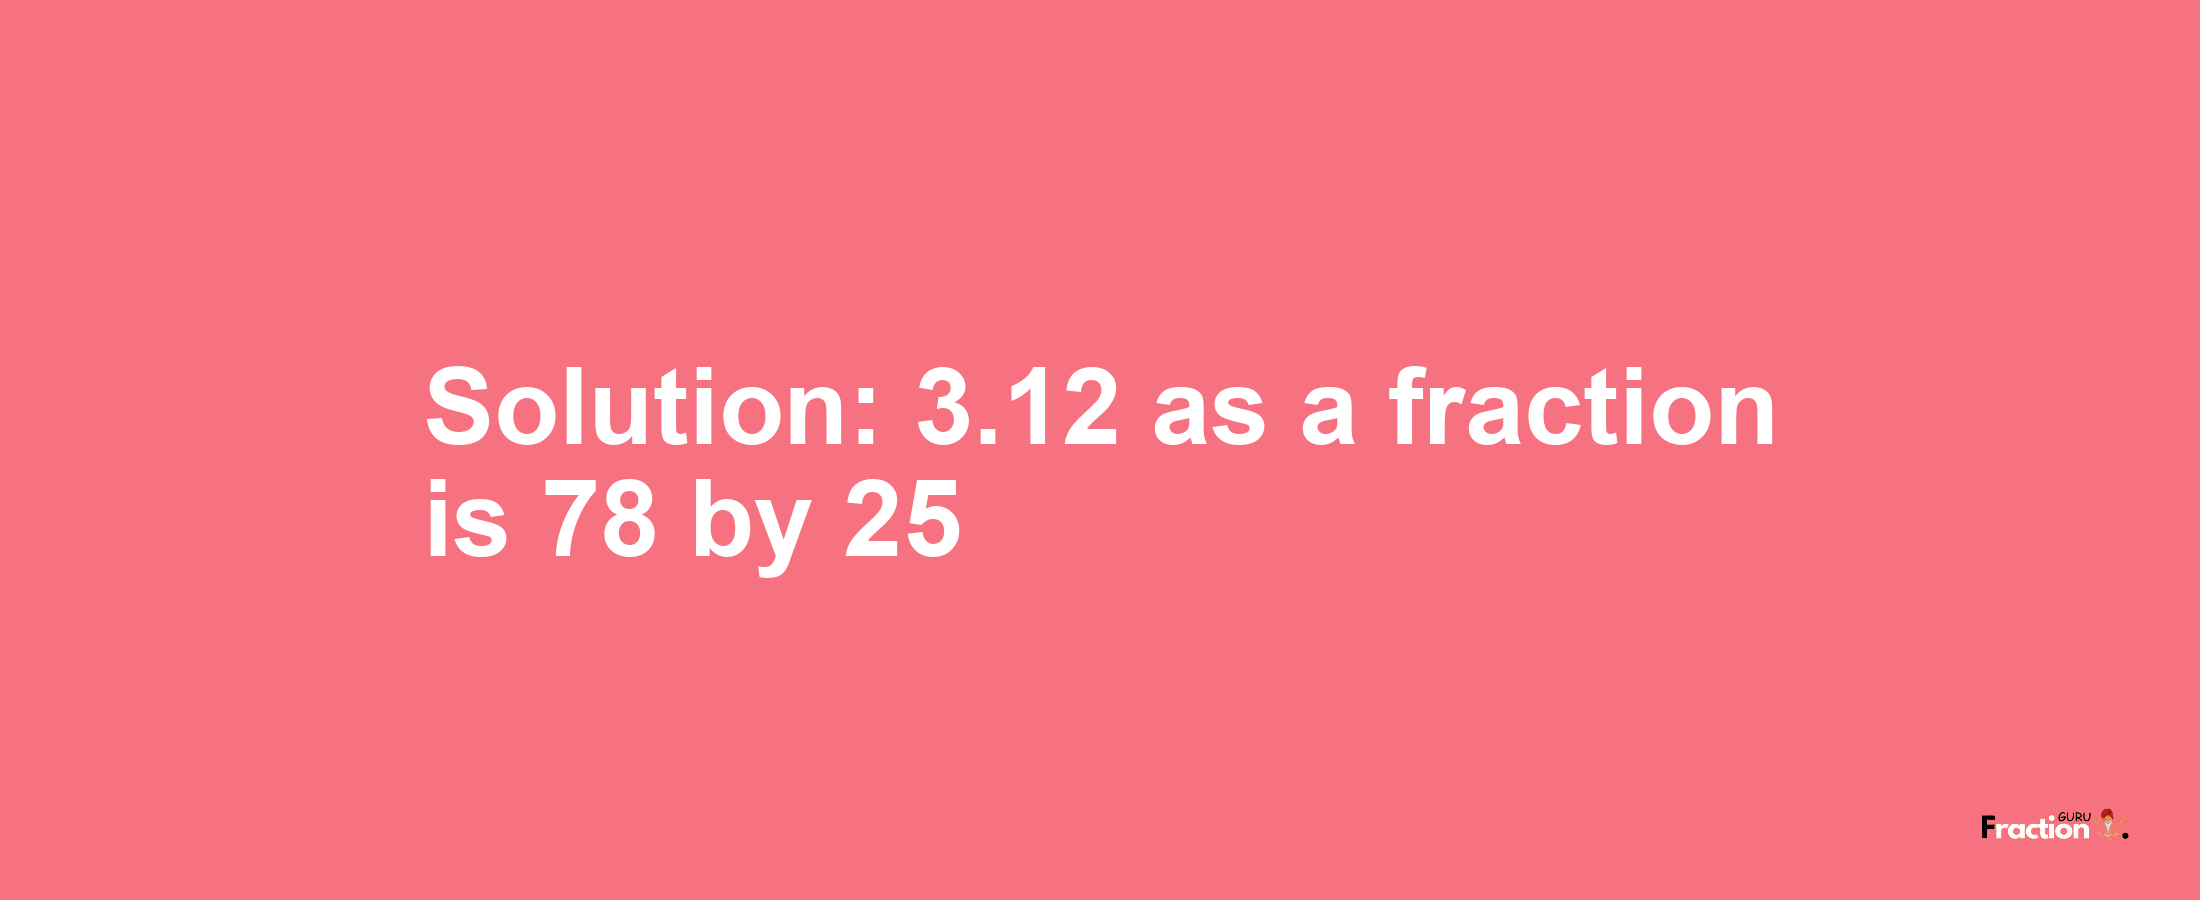 Solution:3.12 as a fraction is 78/25